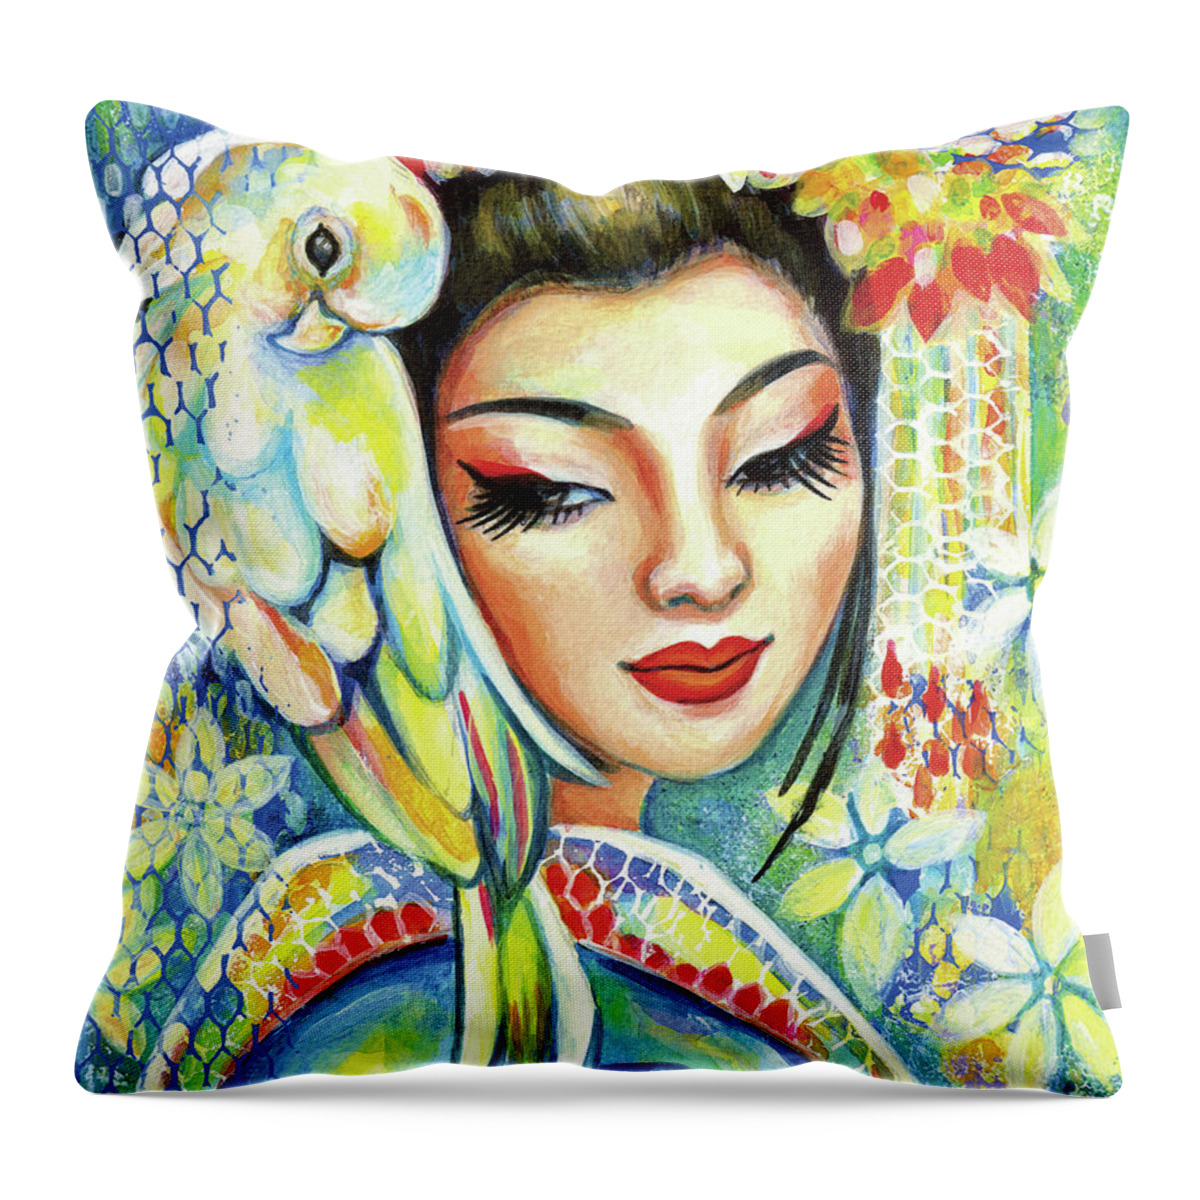 Woman And Parrot Throw Pillow featuring the painting Harmony by Eva Campbell